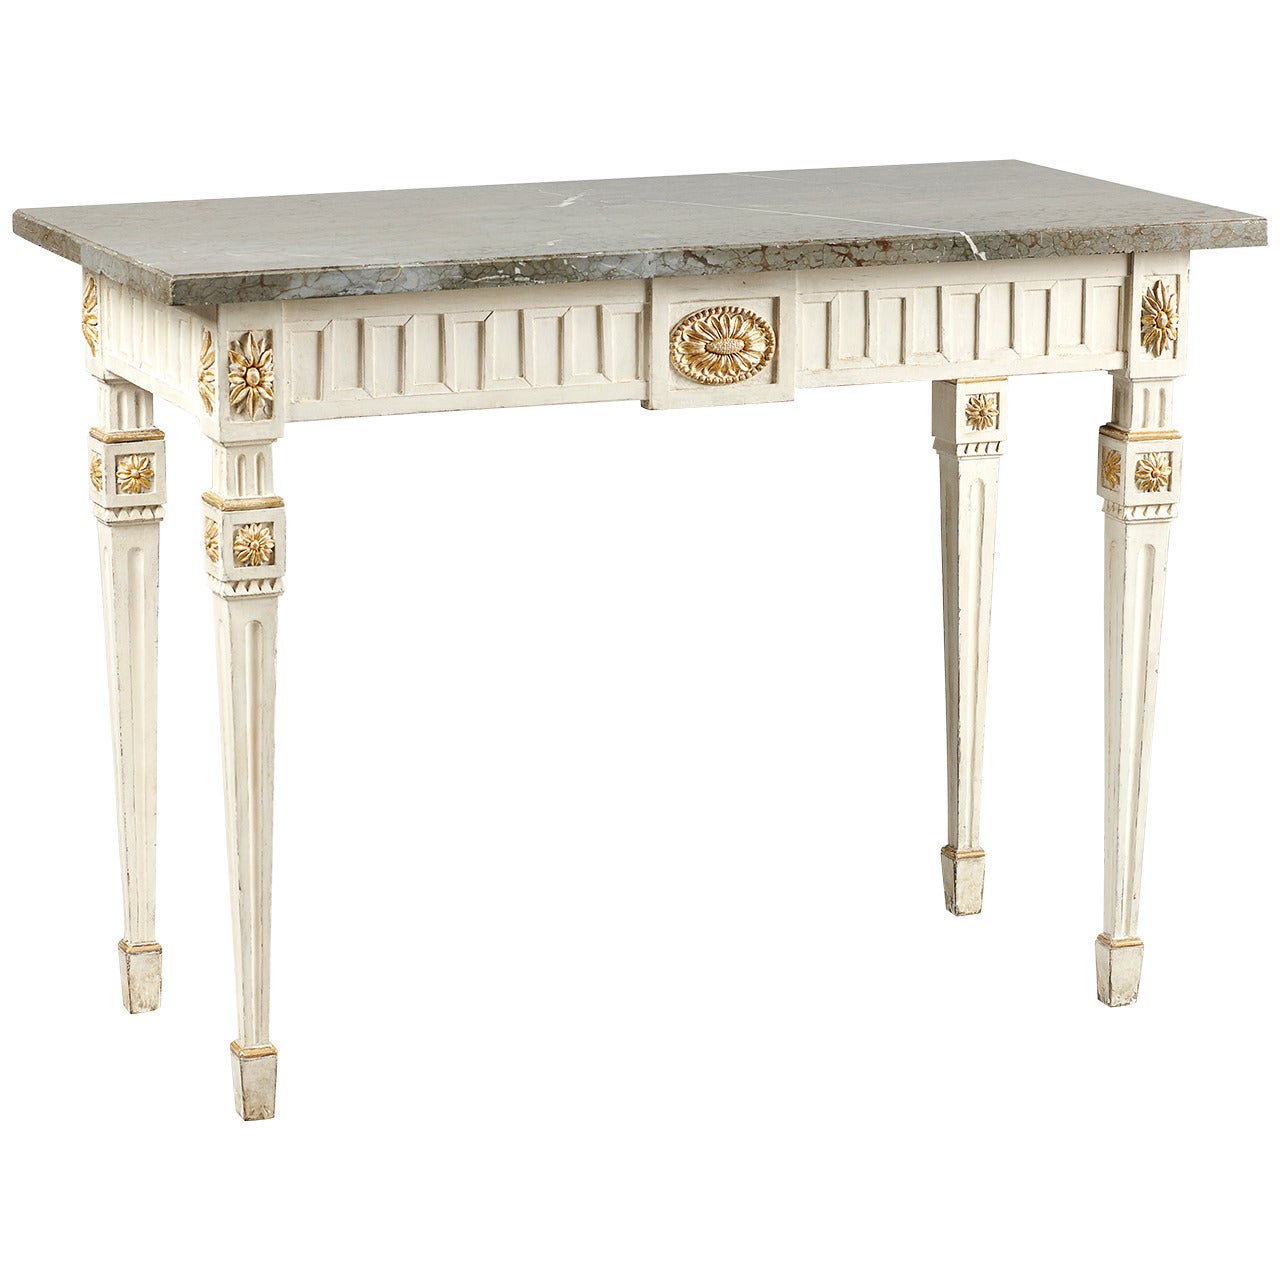 Gustavian Late 18th Century Neoclassical Swedish, White-Painted Console Table